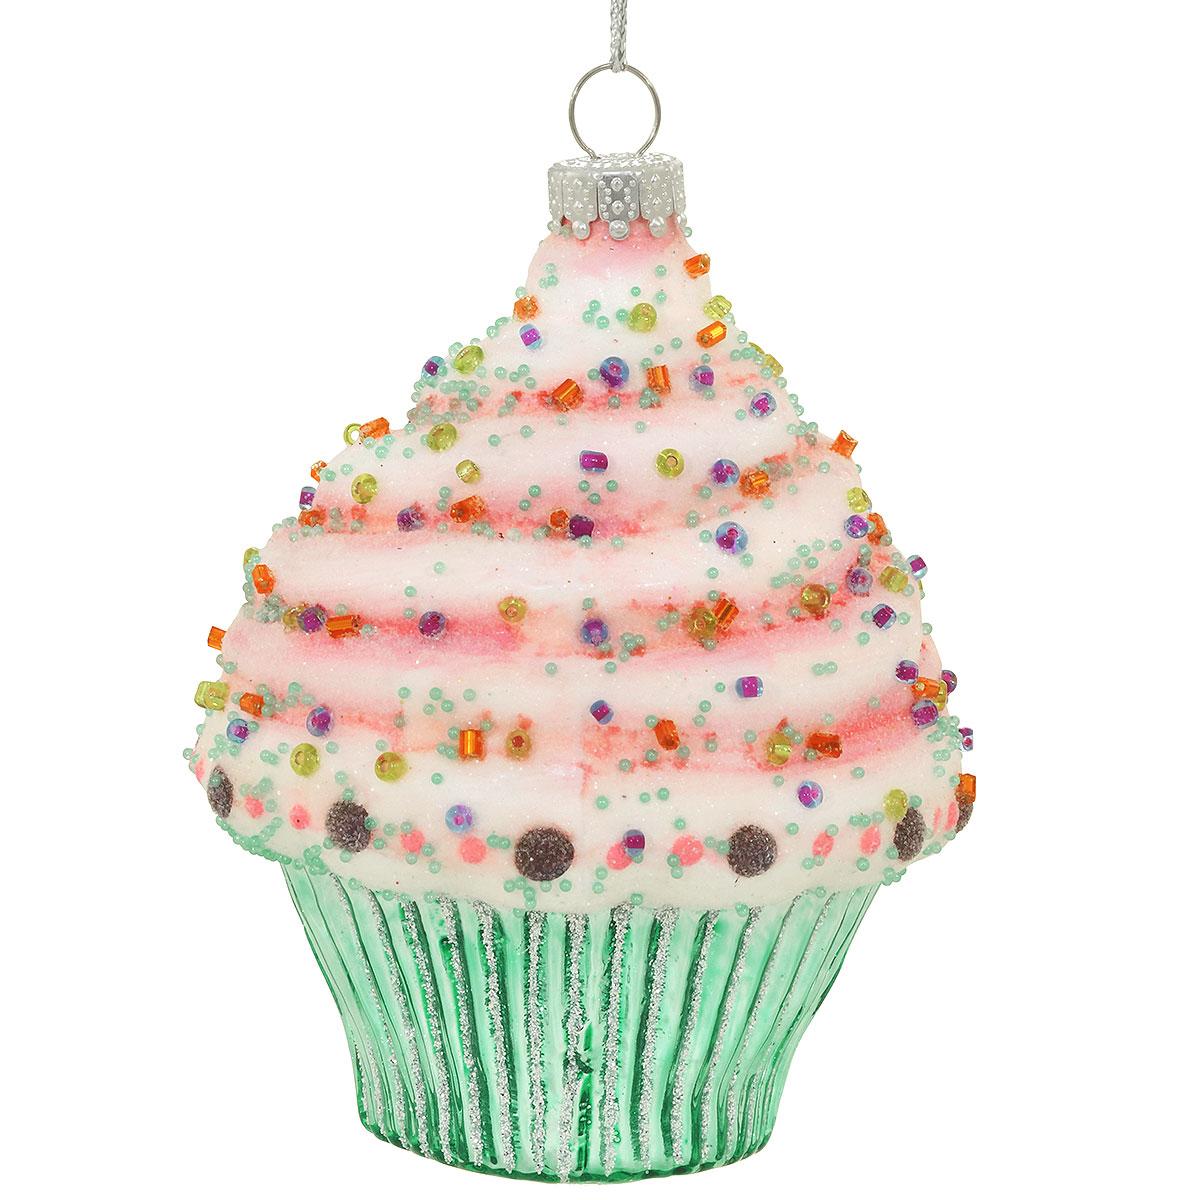 Cupcake With Sprinkles Ornament